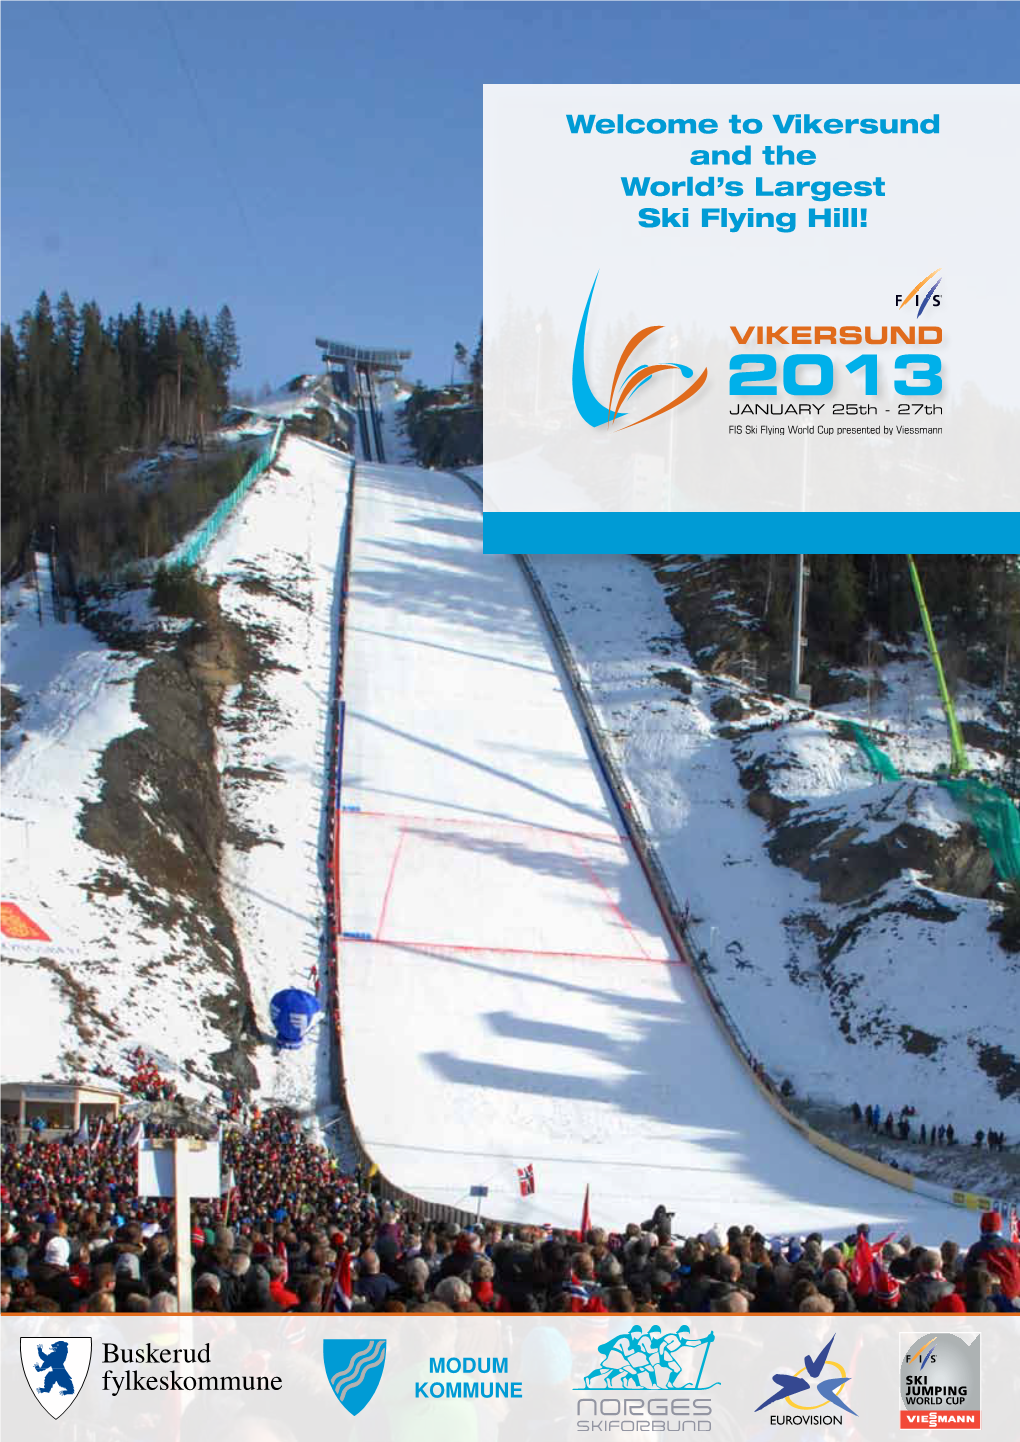 Vikersund and the World's Largest Ski Flying Hill!